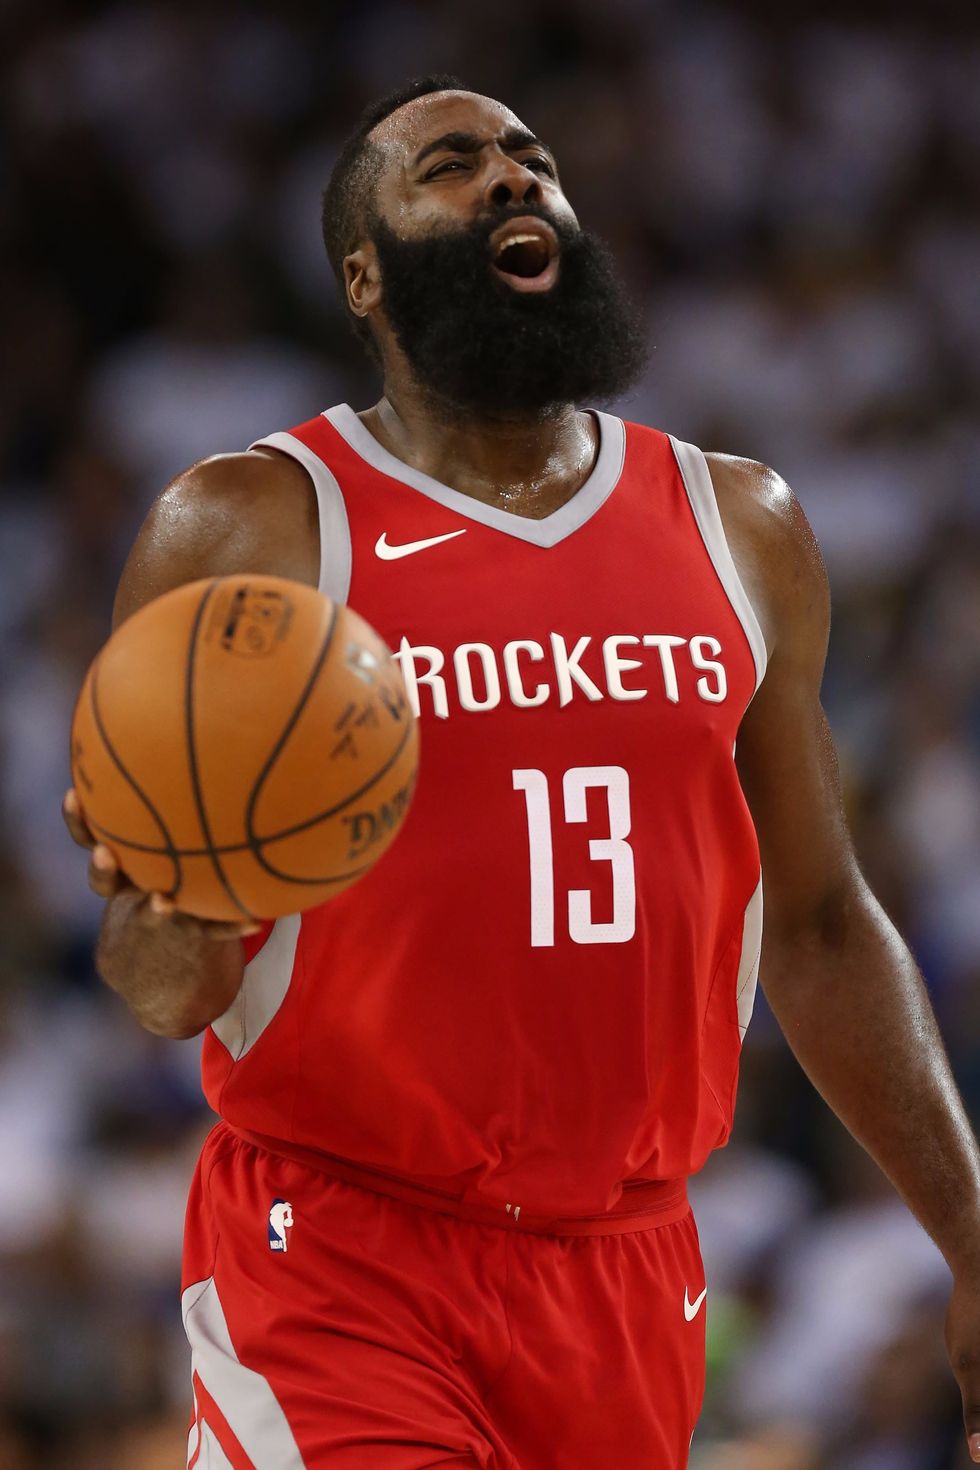 Game 2 preview: Rockets vs. Timberwolves